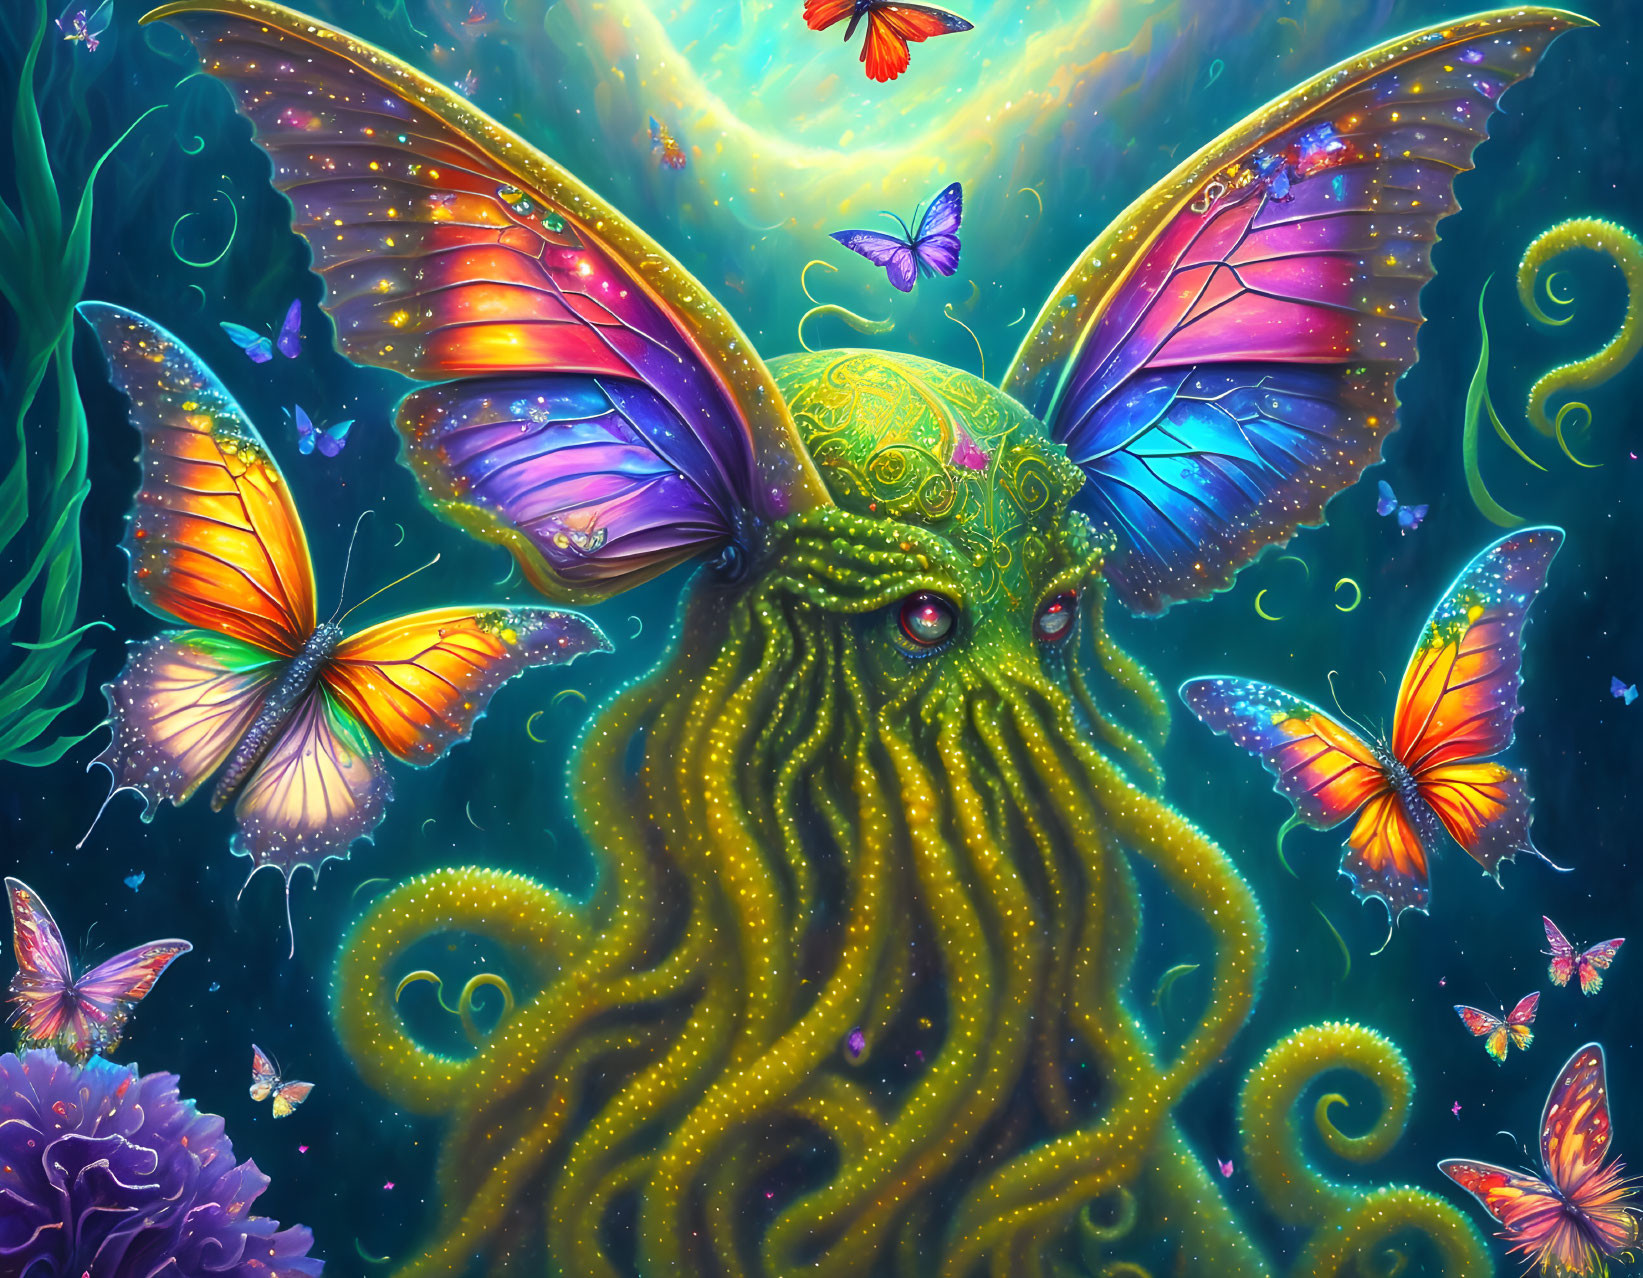 Colorful mythical creature with butterfly wings and tentacles in magical galaxy scene